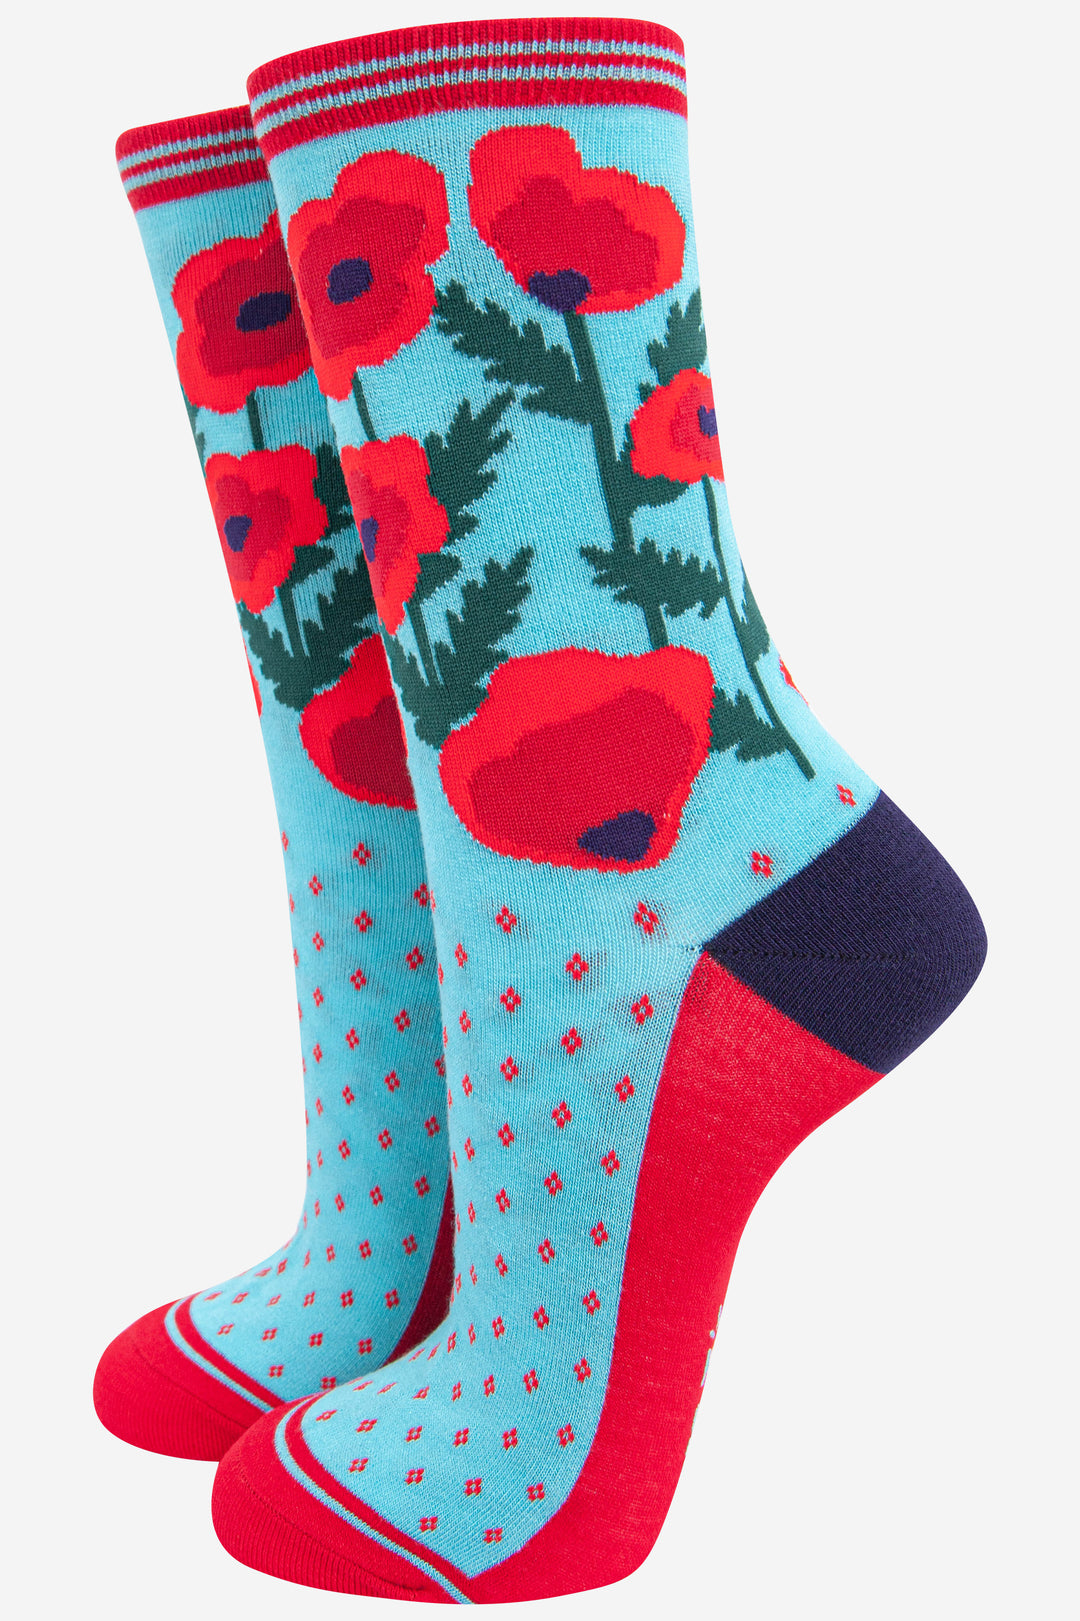 blue and red ankle socks with red poppy flowers on the ankle